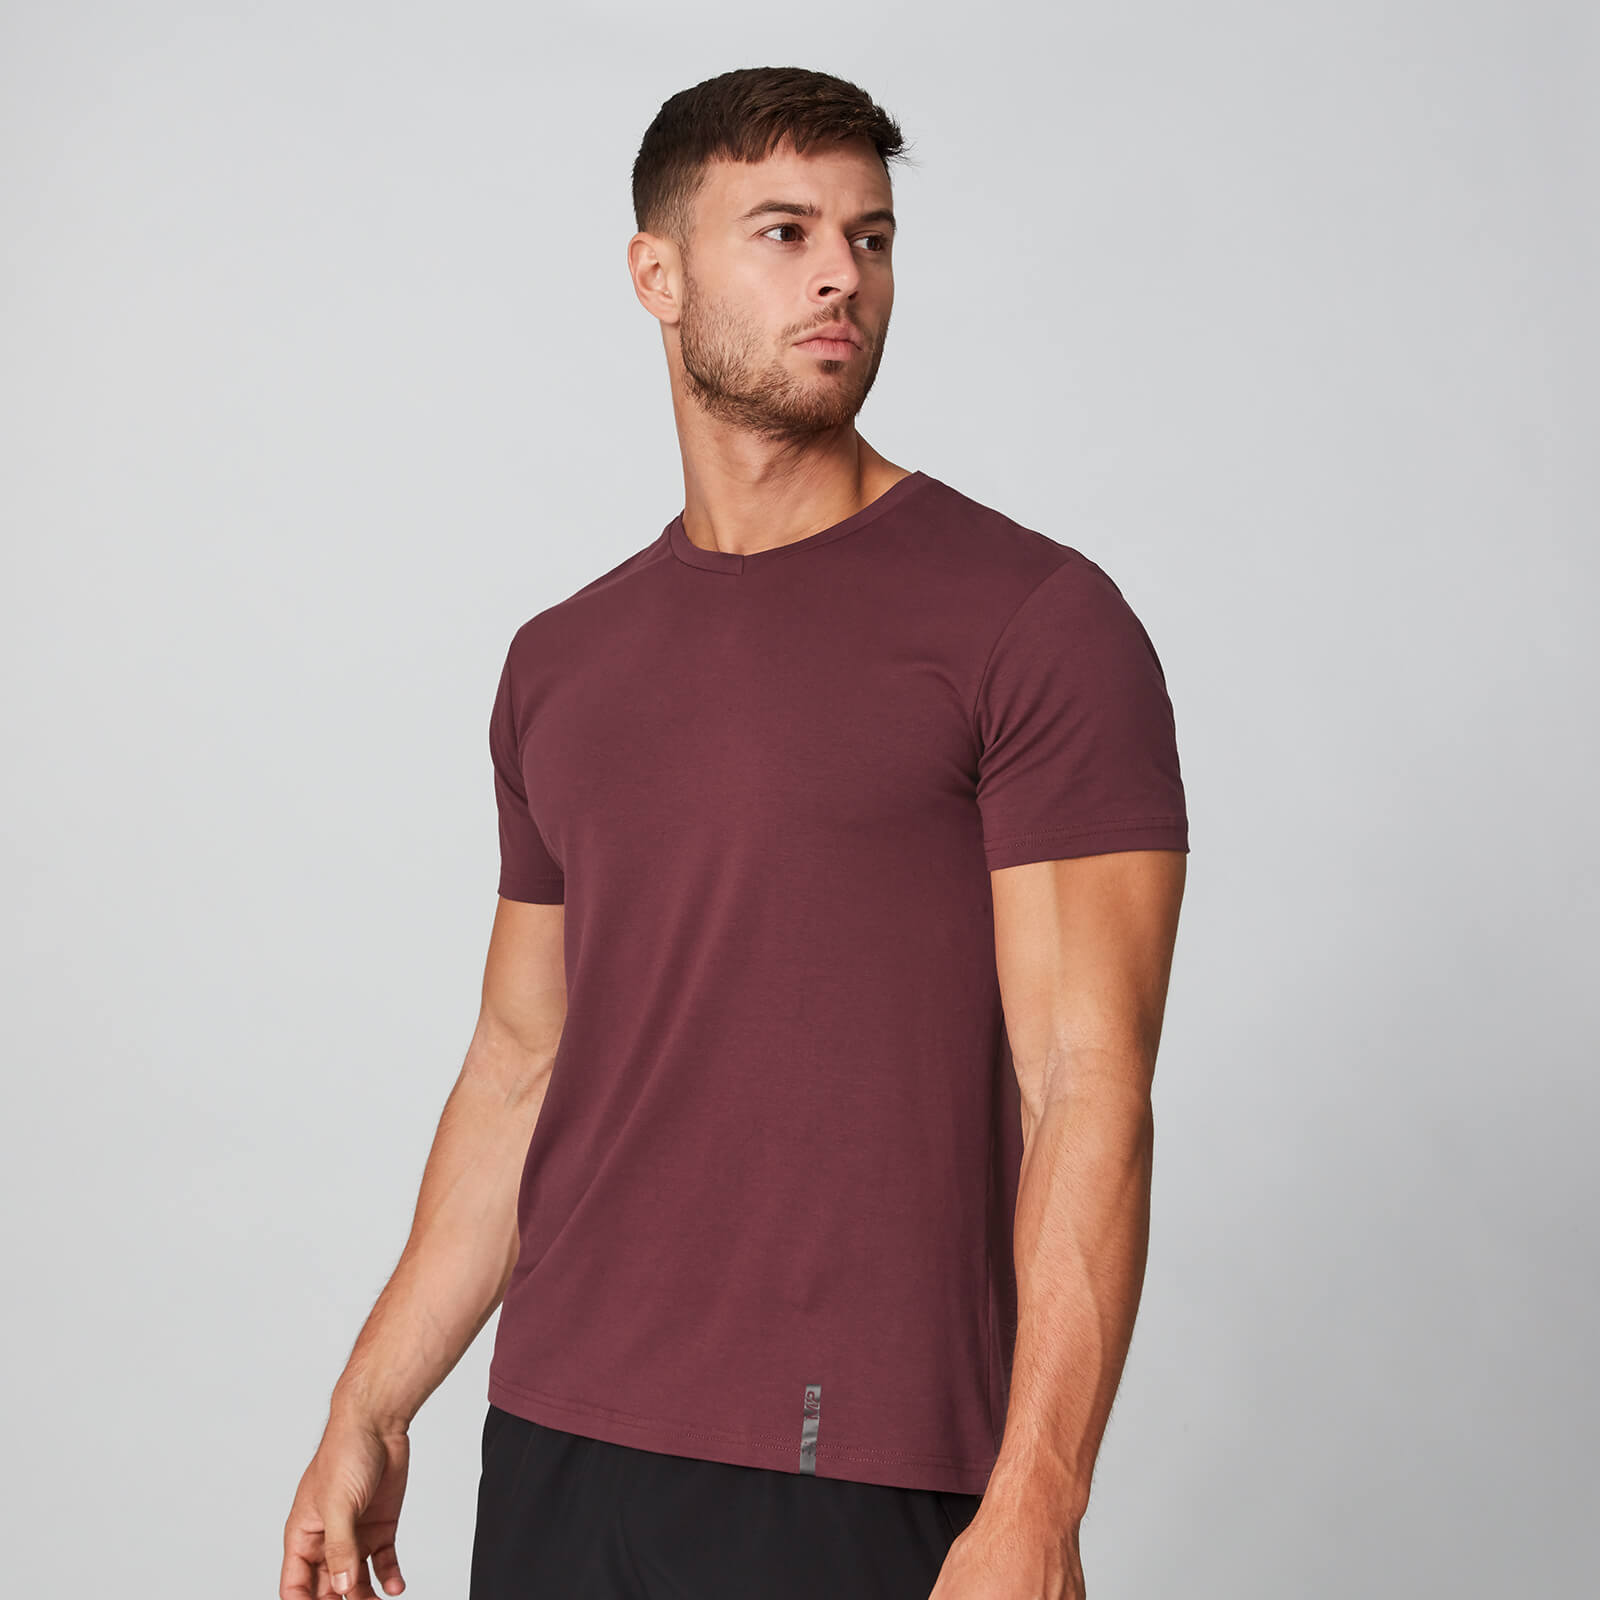 Luxe Classic V-Neck T-Shirt - Oxblood - XS